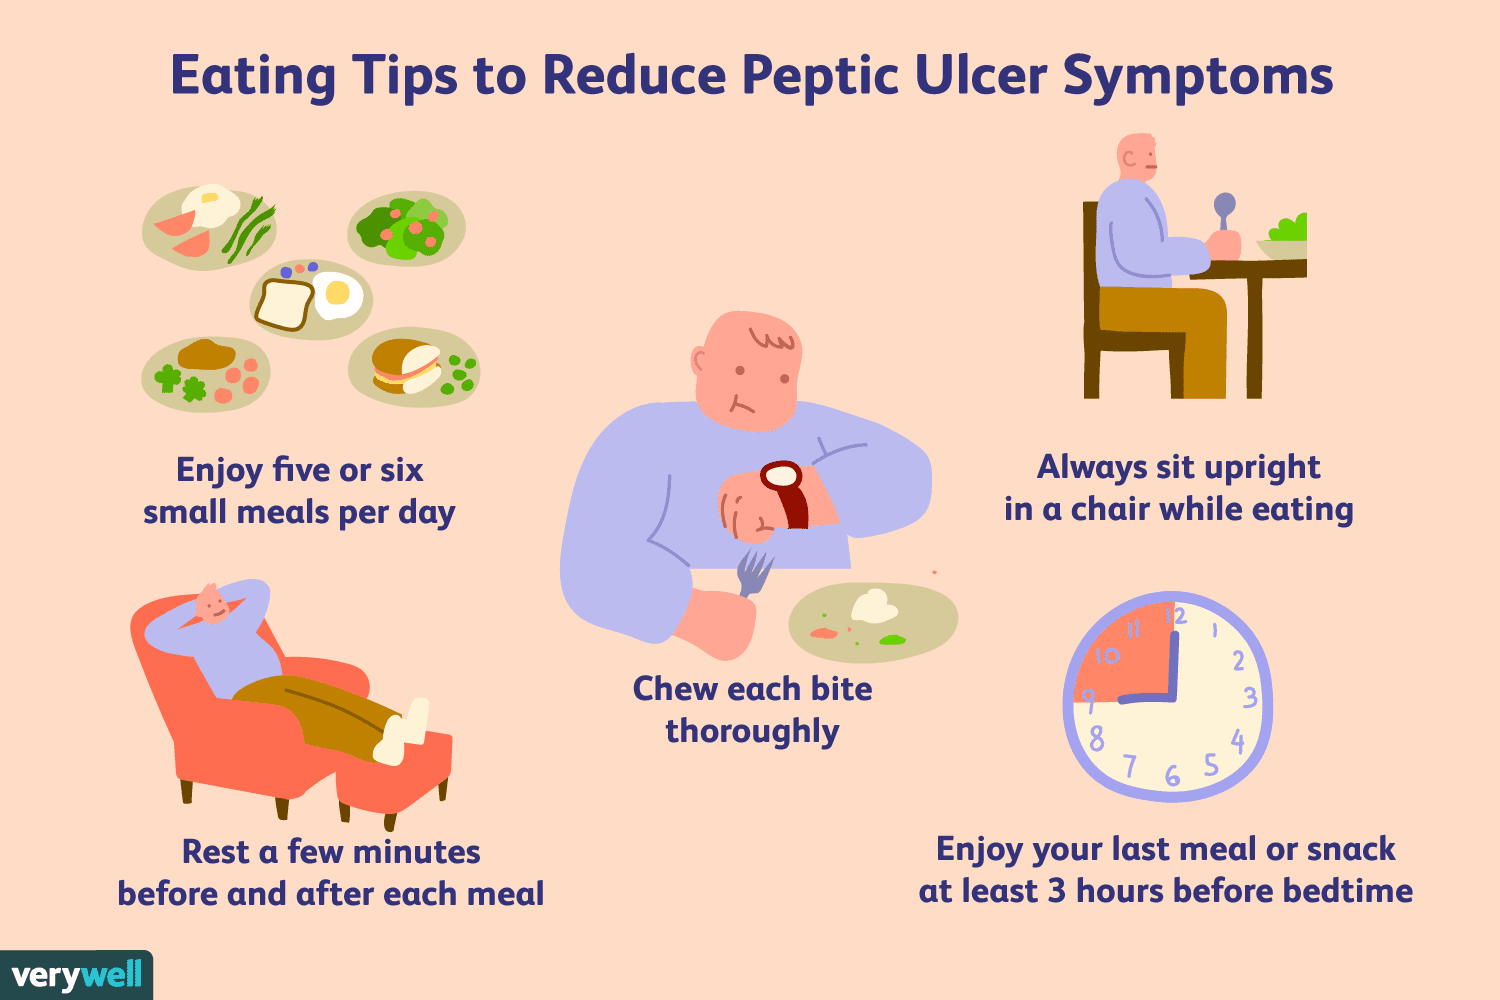 Peptic Ulcer Disease: Overview and More